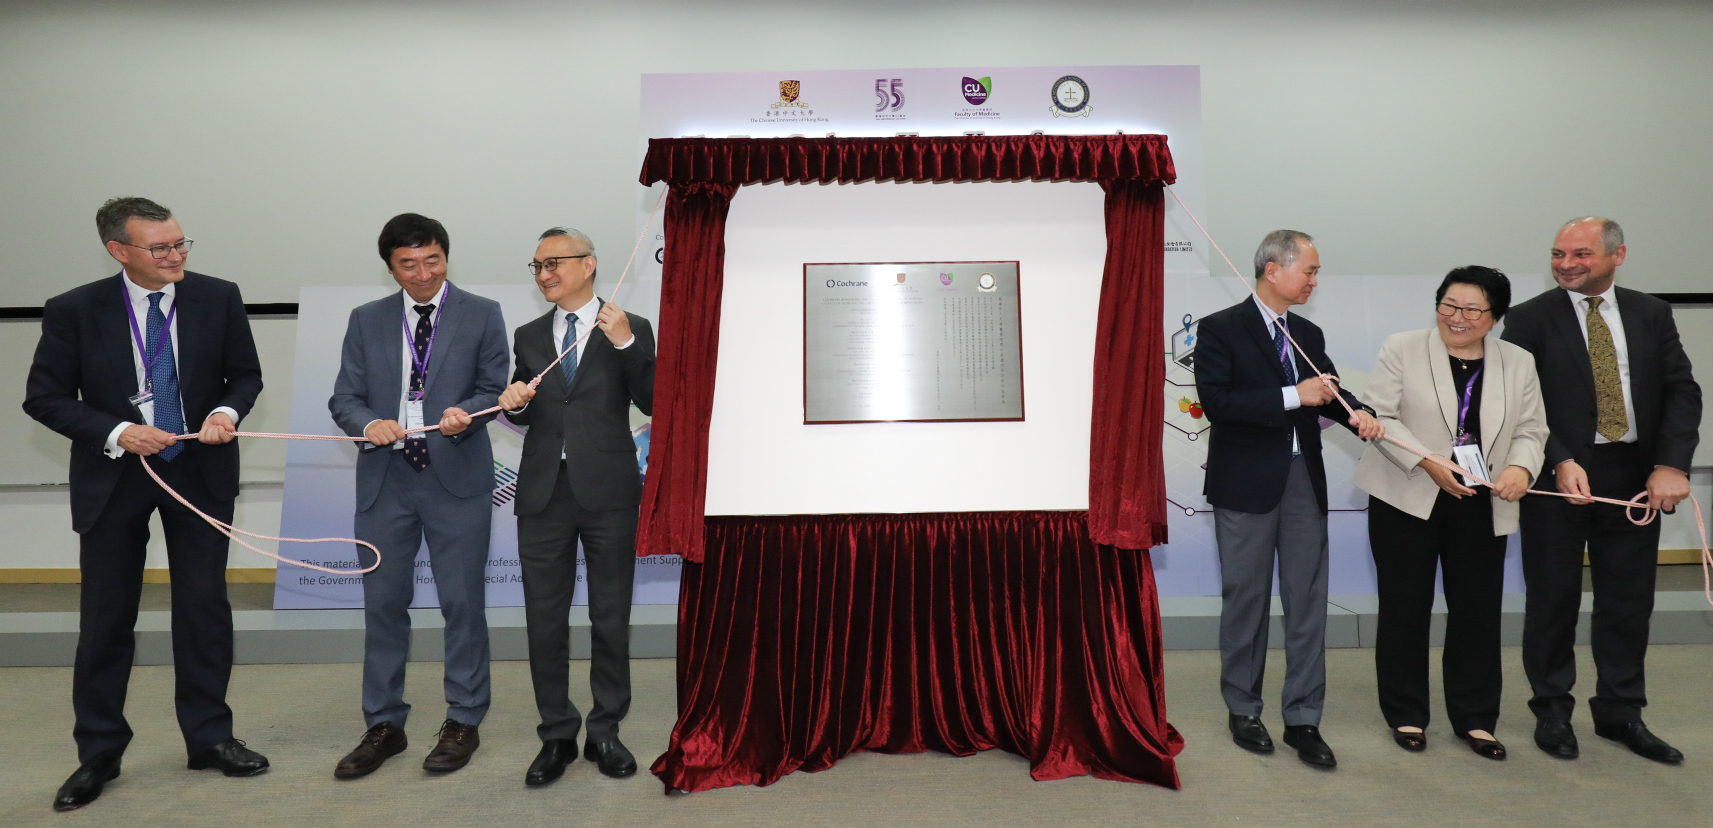 Officiating guests host a plaque unveiling ceremony to mark the official establishment of “Cochrane Hong Kong” under The Nethersole School of Nursing of the Faculty of Medicine at CUHK.